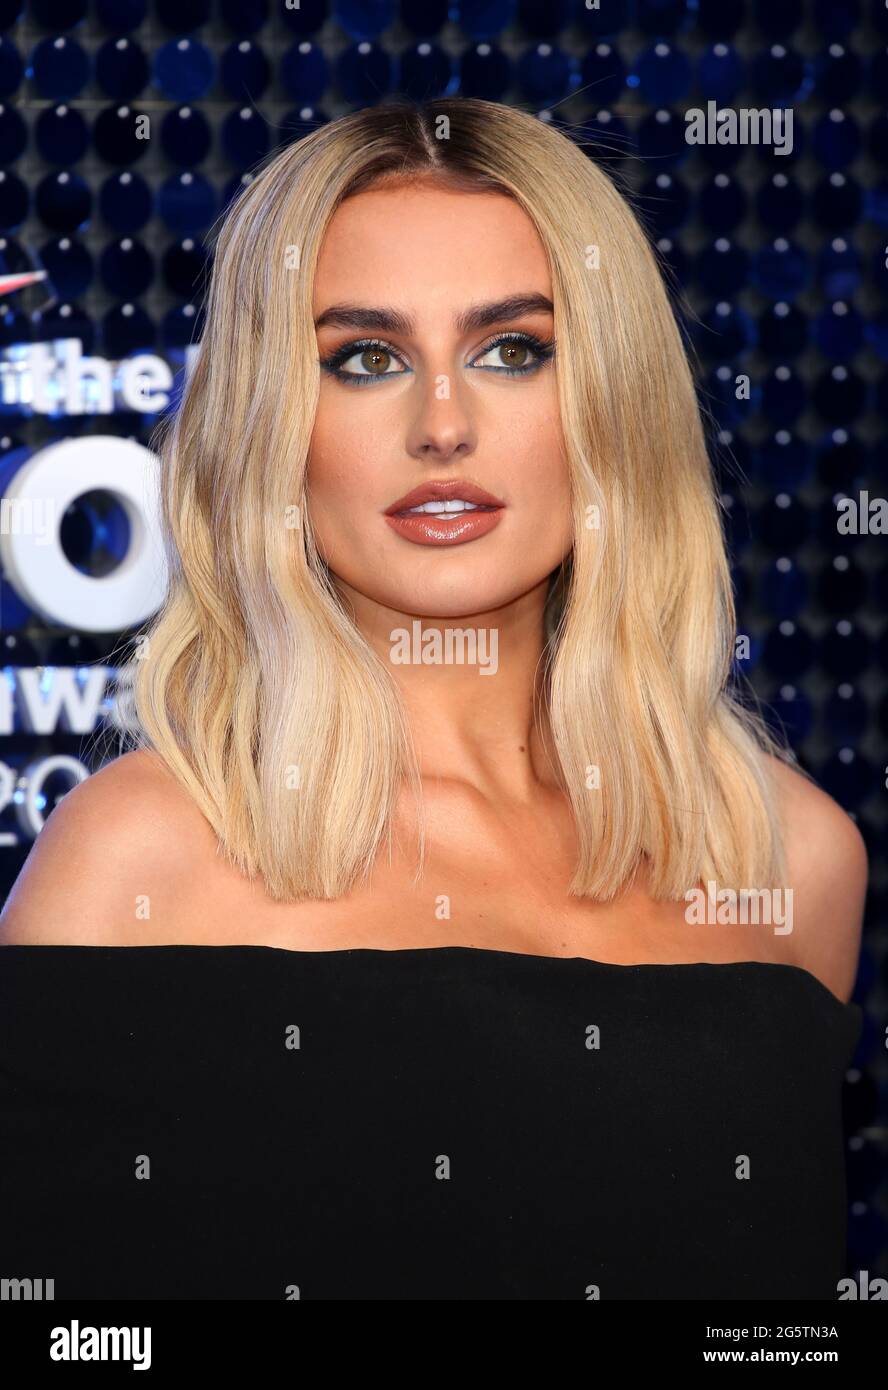 File photo dated 05/03/2020 of Amber Davies, the former Love Island Star has landed her first TV role and will join CBBCÕs almost never for its third season, it has been angekündigt. Ausgabedatum: Mittwoch, 30. Juni 2021. Stockfoto